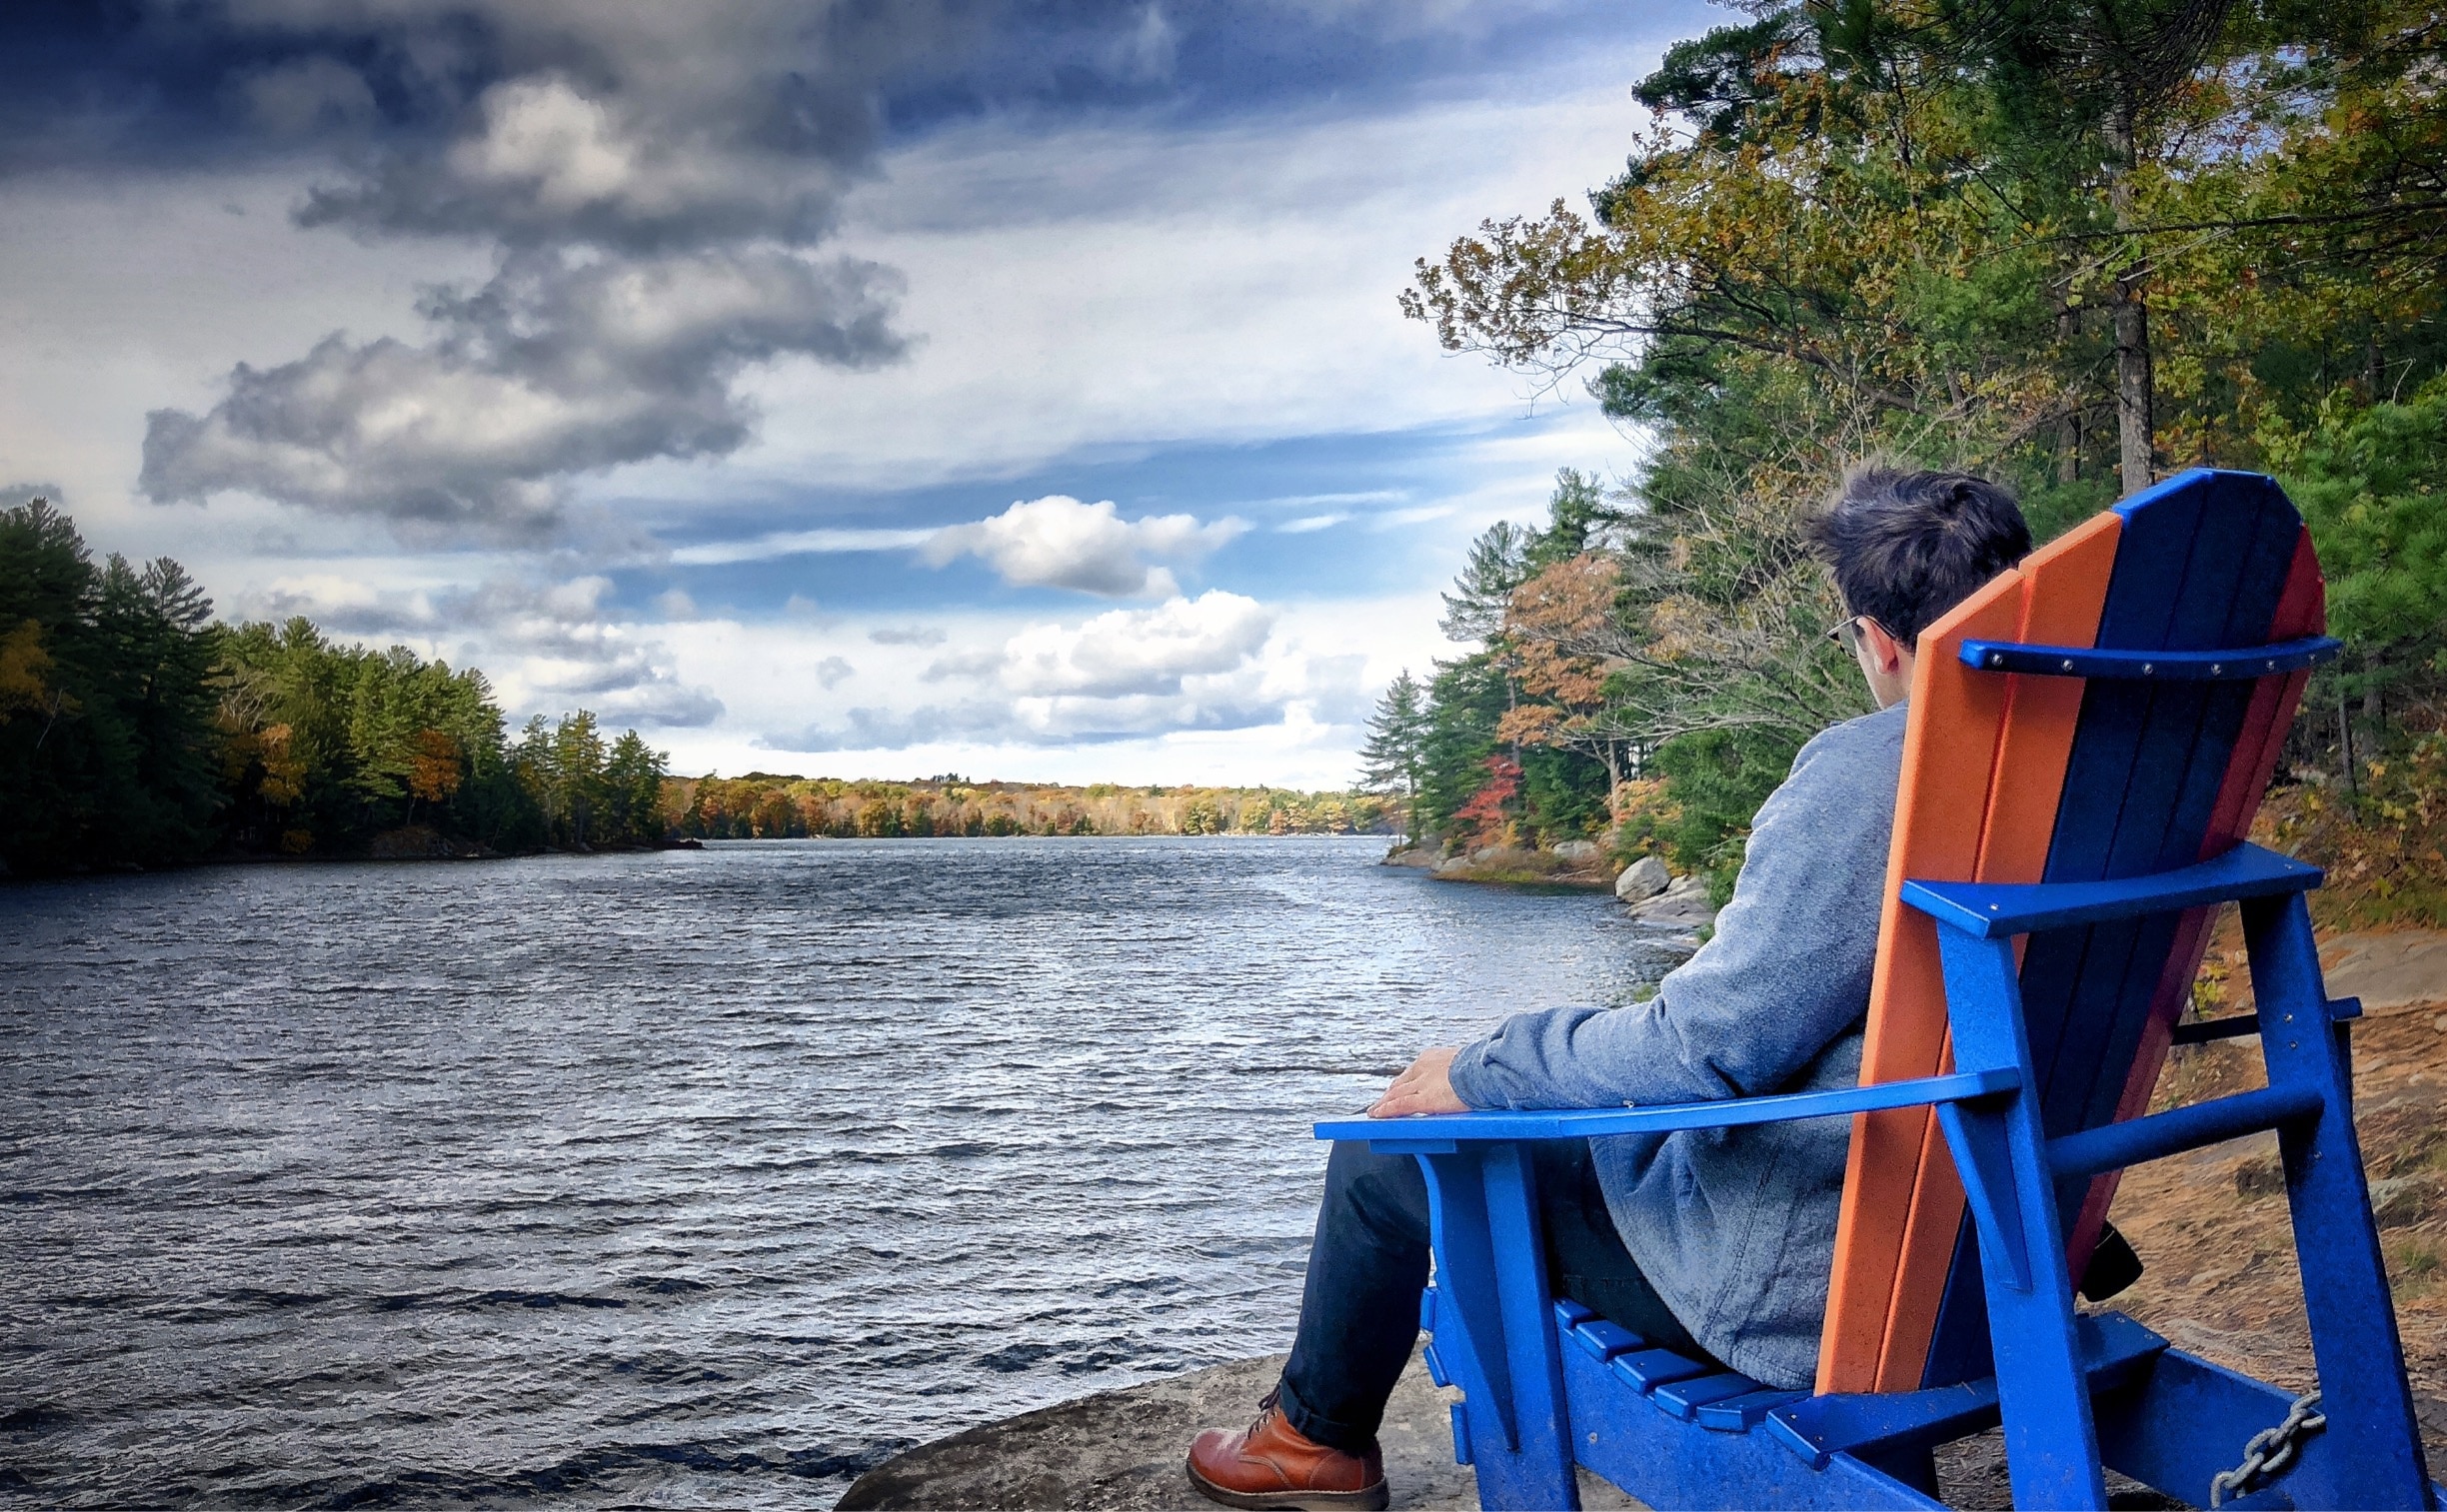 Lake Muskoka Chair...spotted some of these nice chairs all around, and this one provided a very relaxing stop while hiking the parameter of a small part of this huge lovely lake.
#greatoutdoors